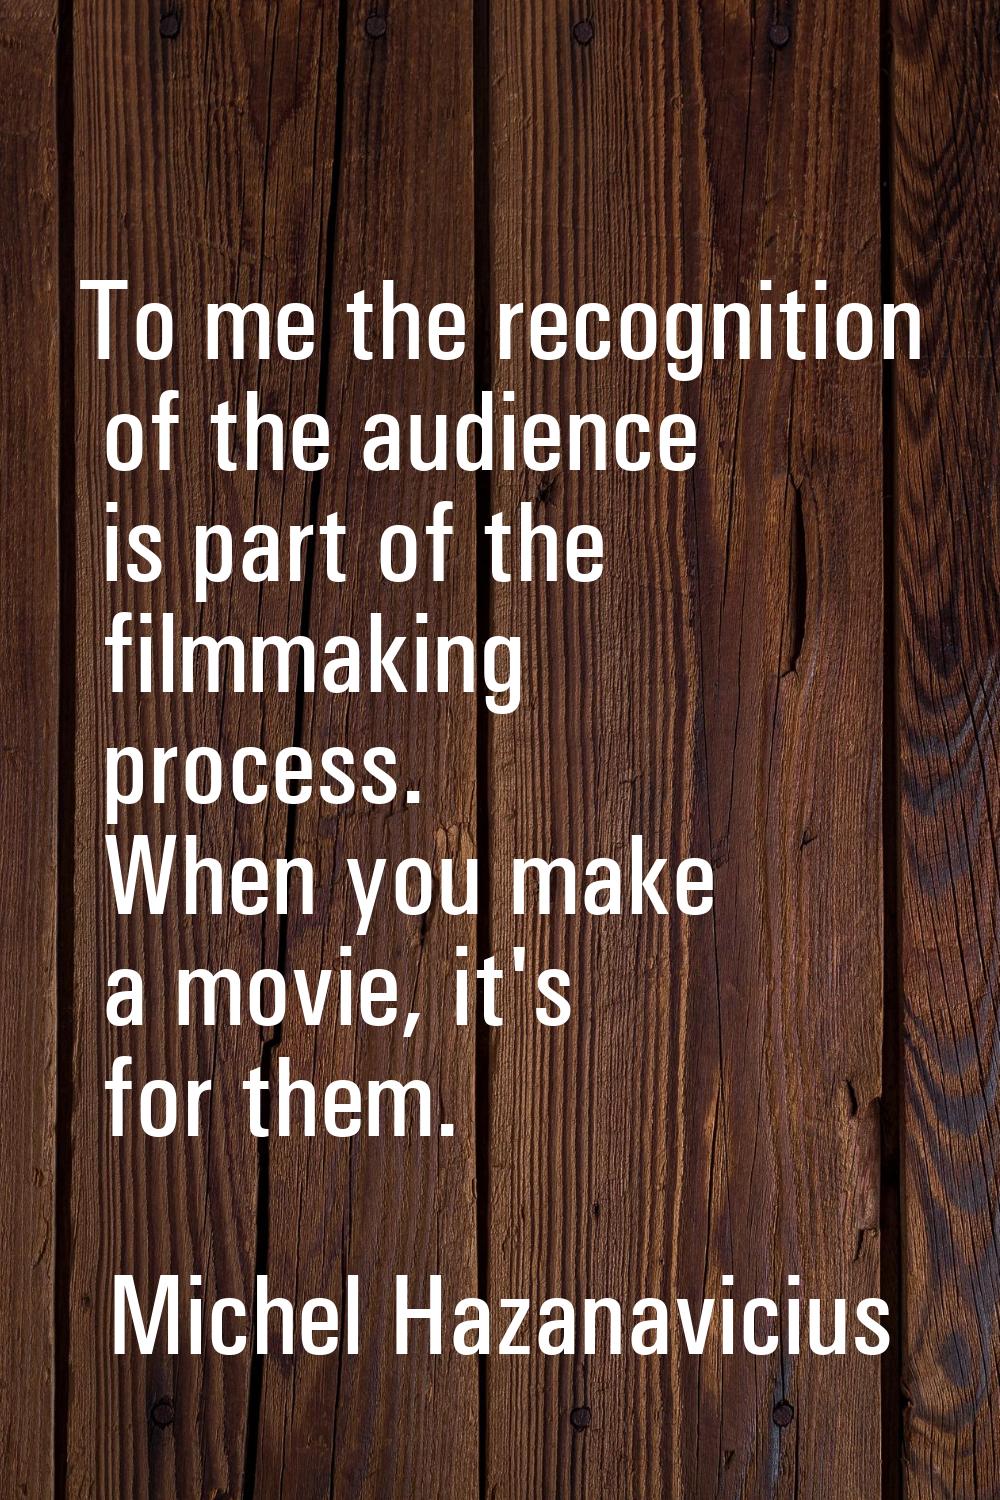 To me the recognition of the audience is part of the filmmaking process. When you make a movie, it'